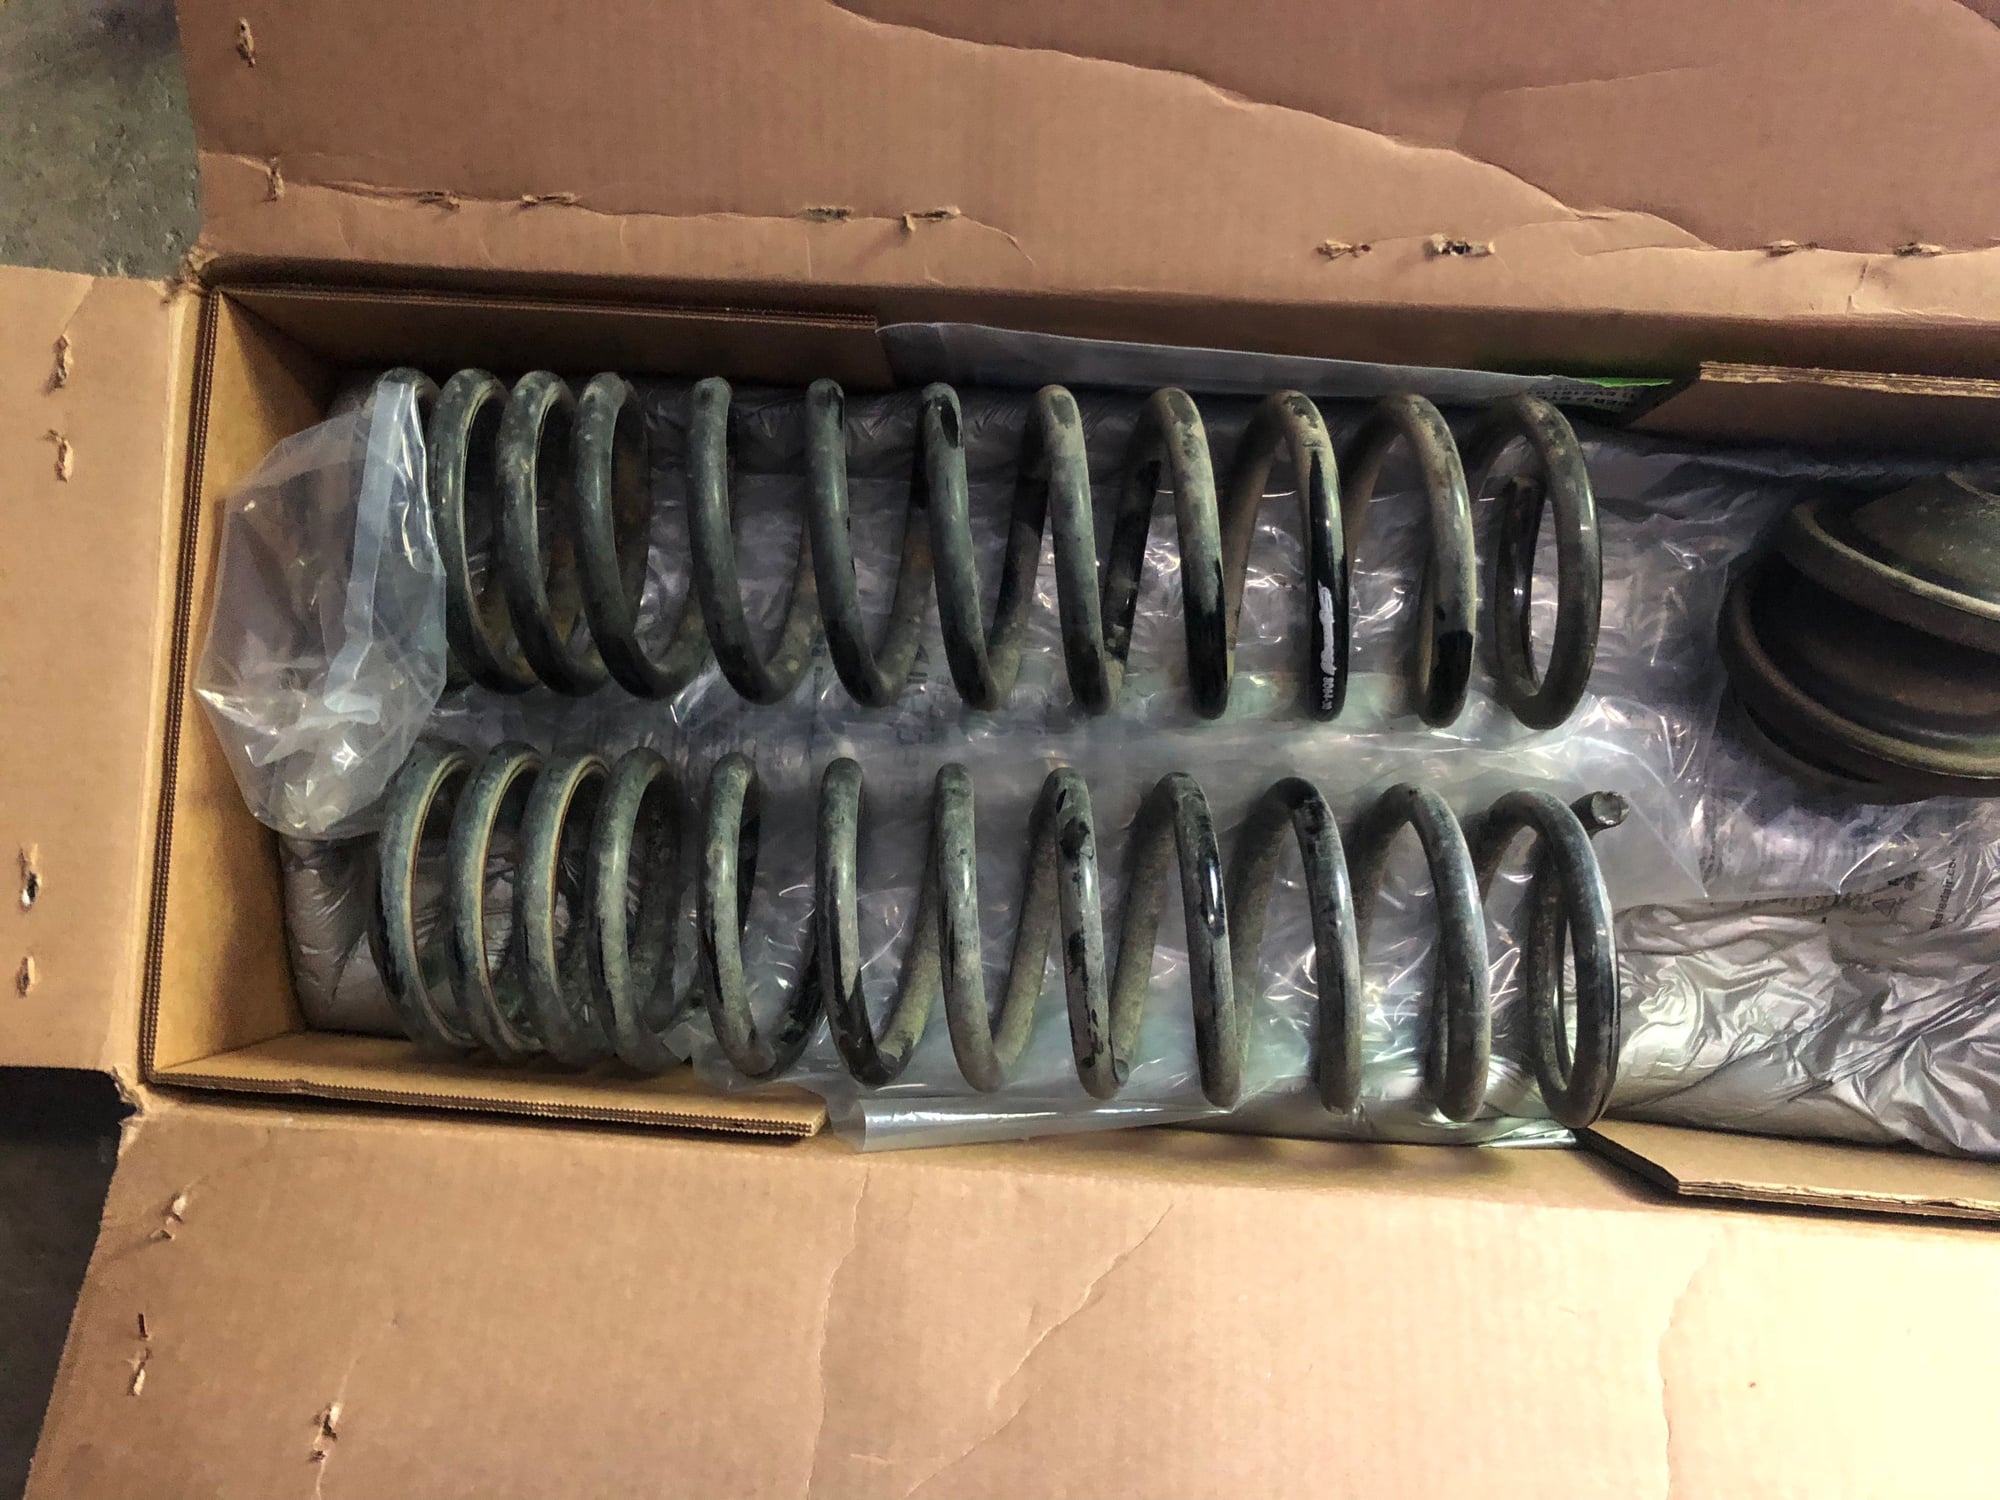 Steering/Suspension - fox shocks and synergy springs - Used - All Years Jeep Wrangler - Chatsworth, CA 91311, United States